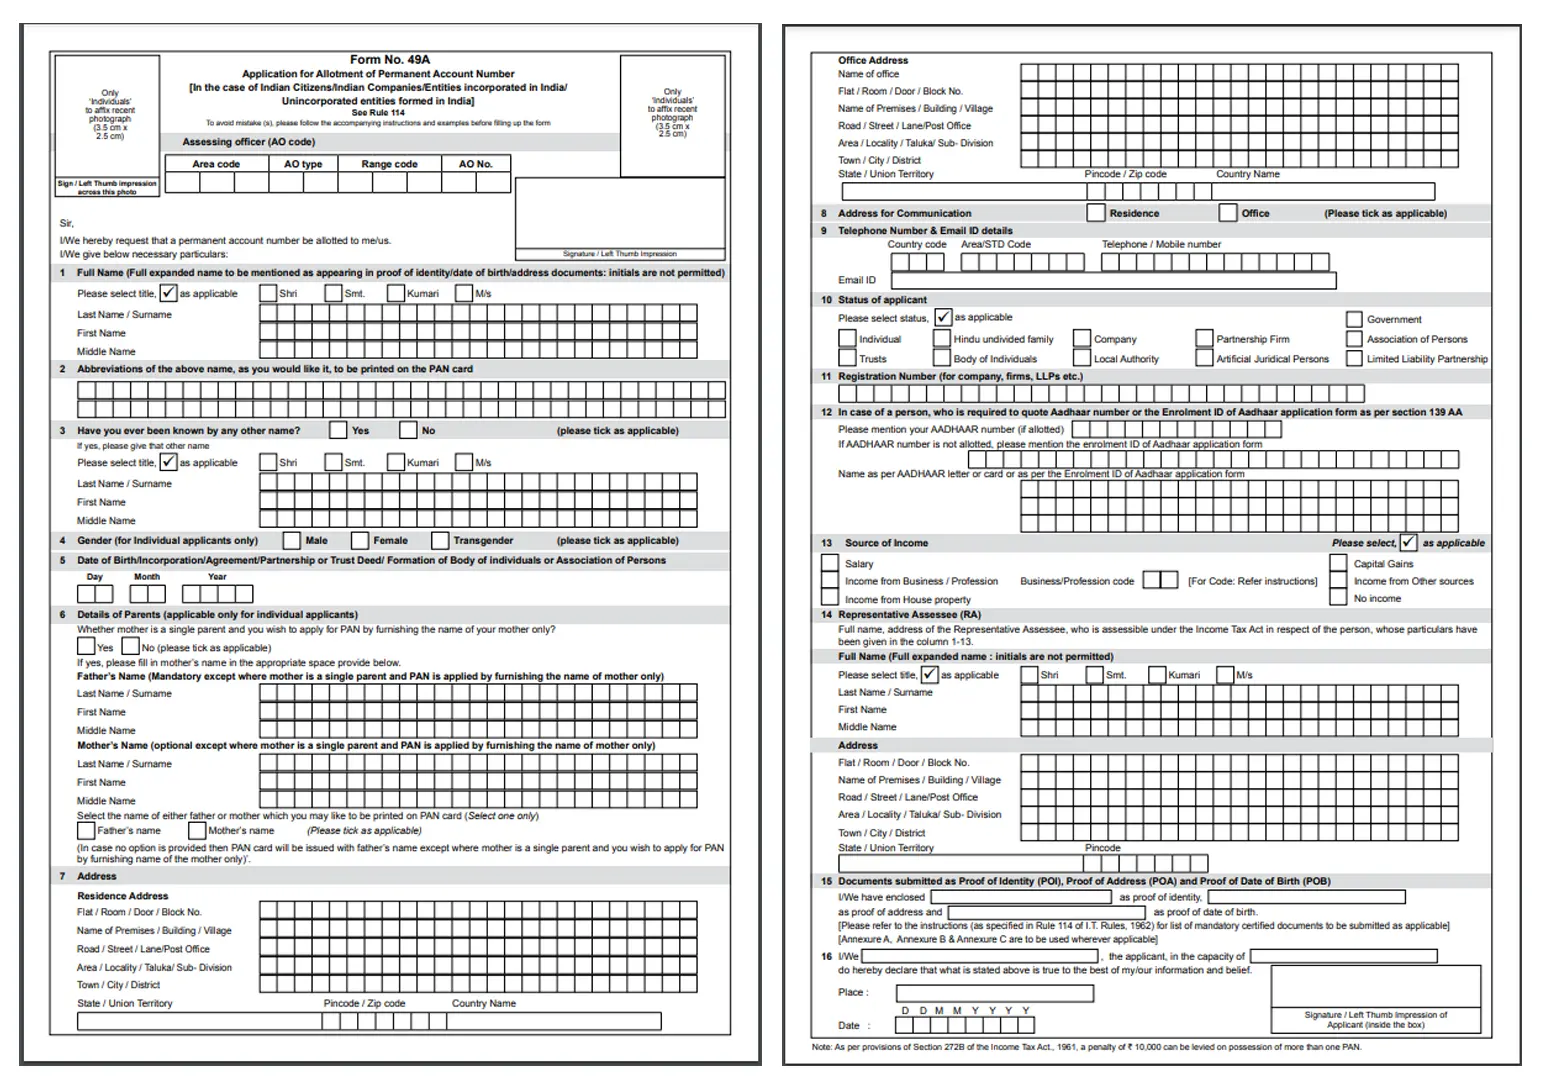 Online PAN Card Form 